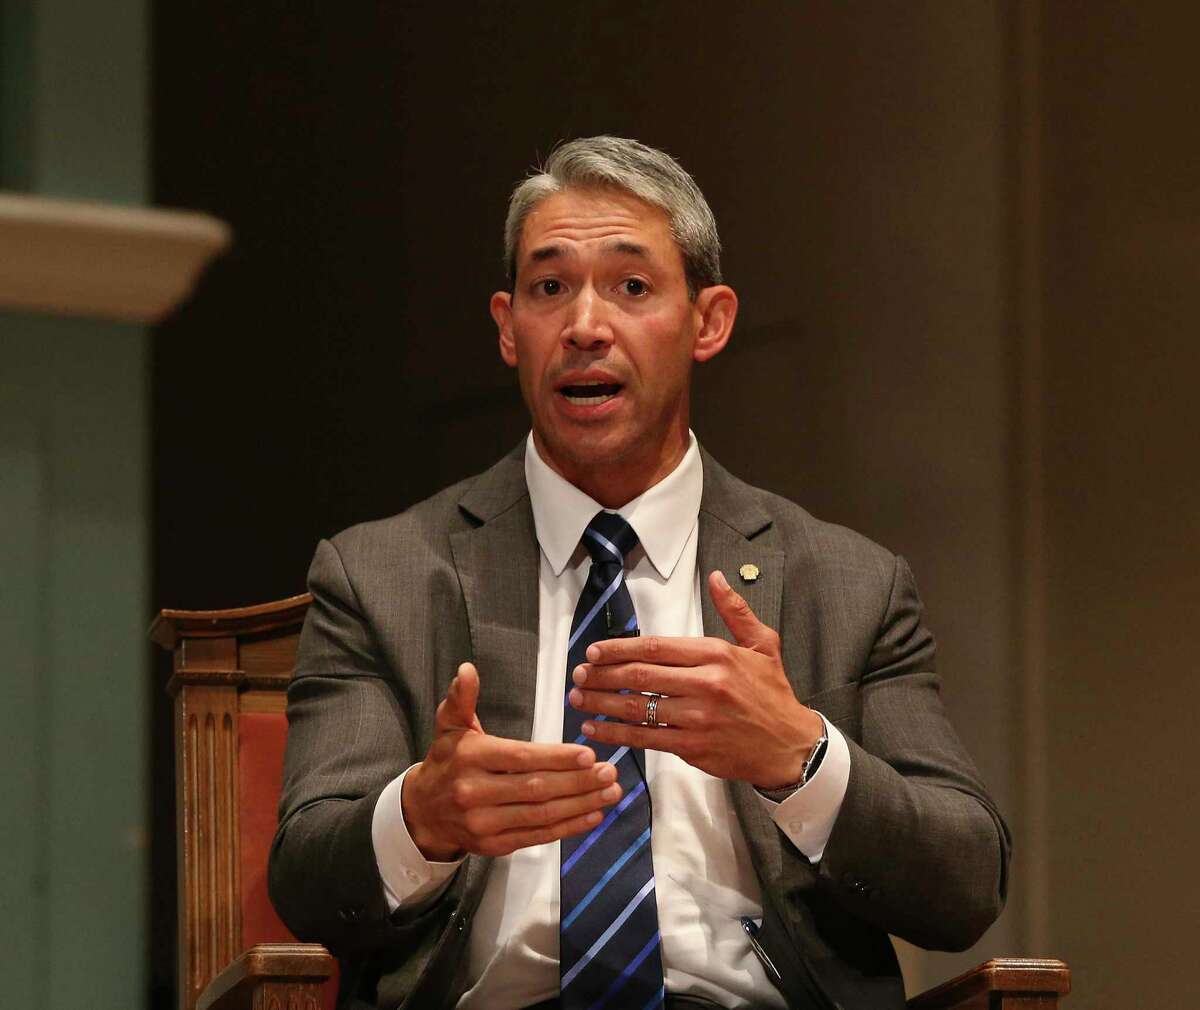 Mayor Ron Nirenberg answers a question during a mayoral forum with Greg Brockhouse at Travis Park Church on Tuesday, May 21, 2019. Nirenberg defeated Brockhouse in the June 8 runoff.